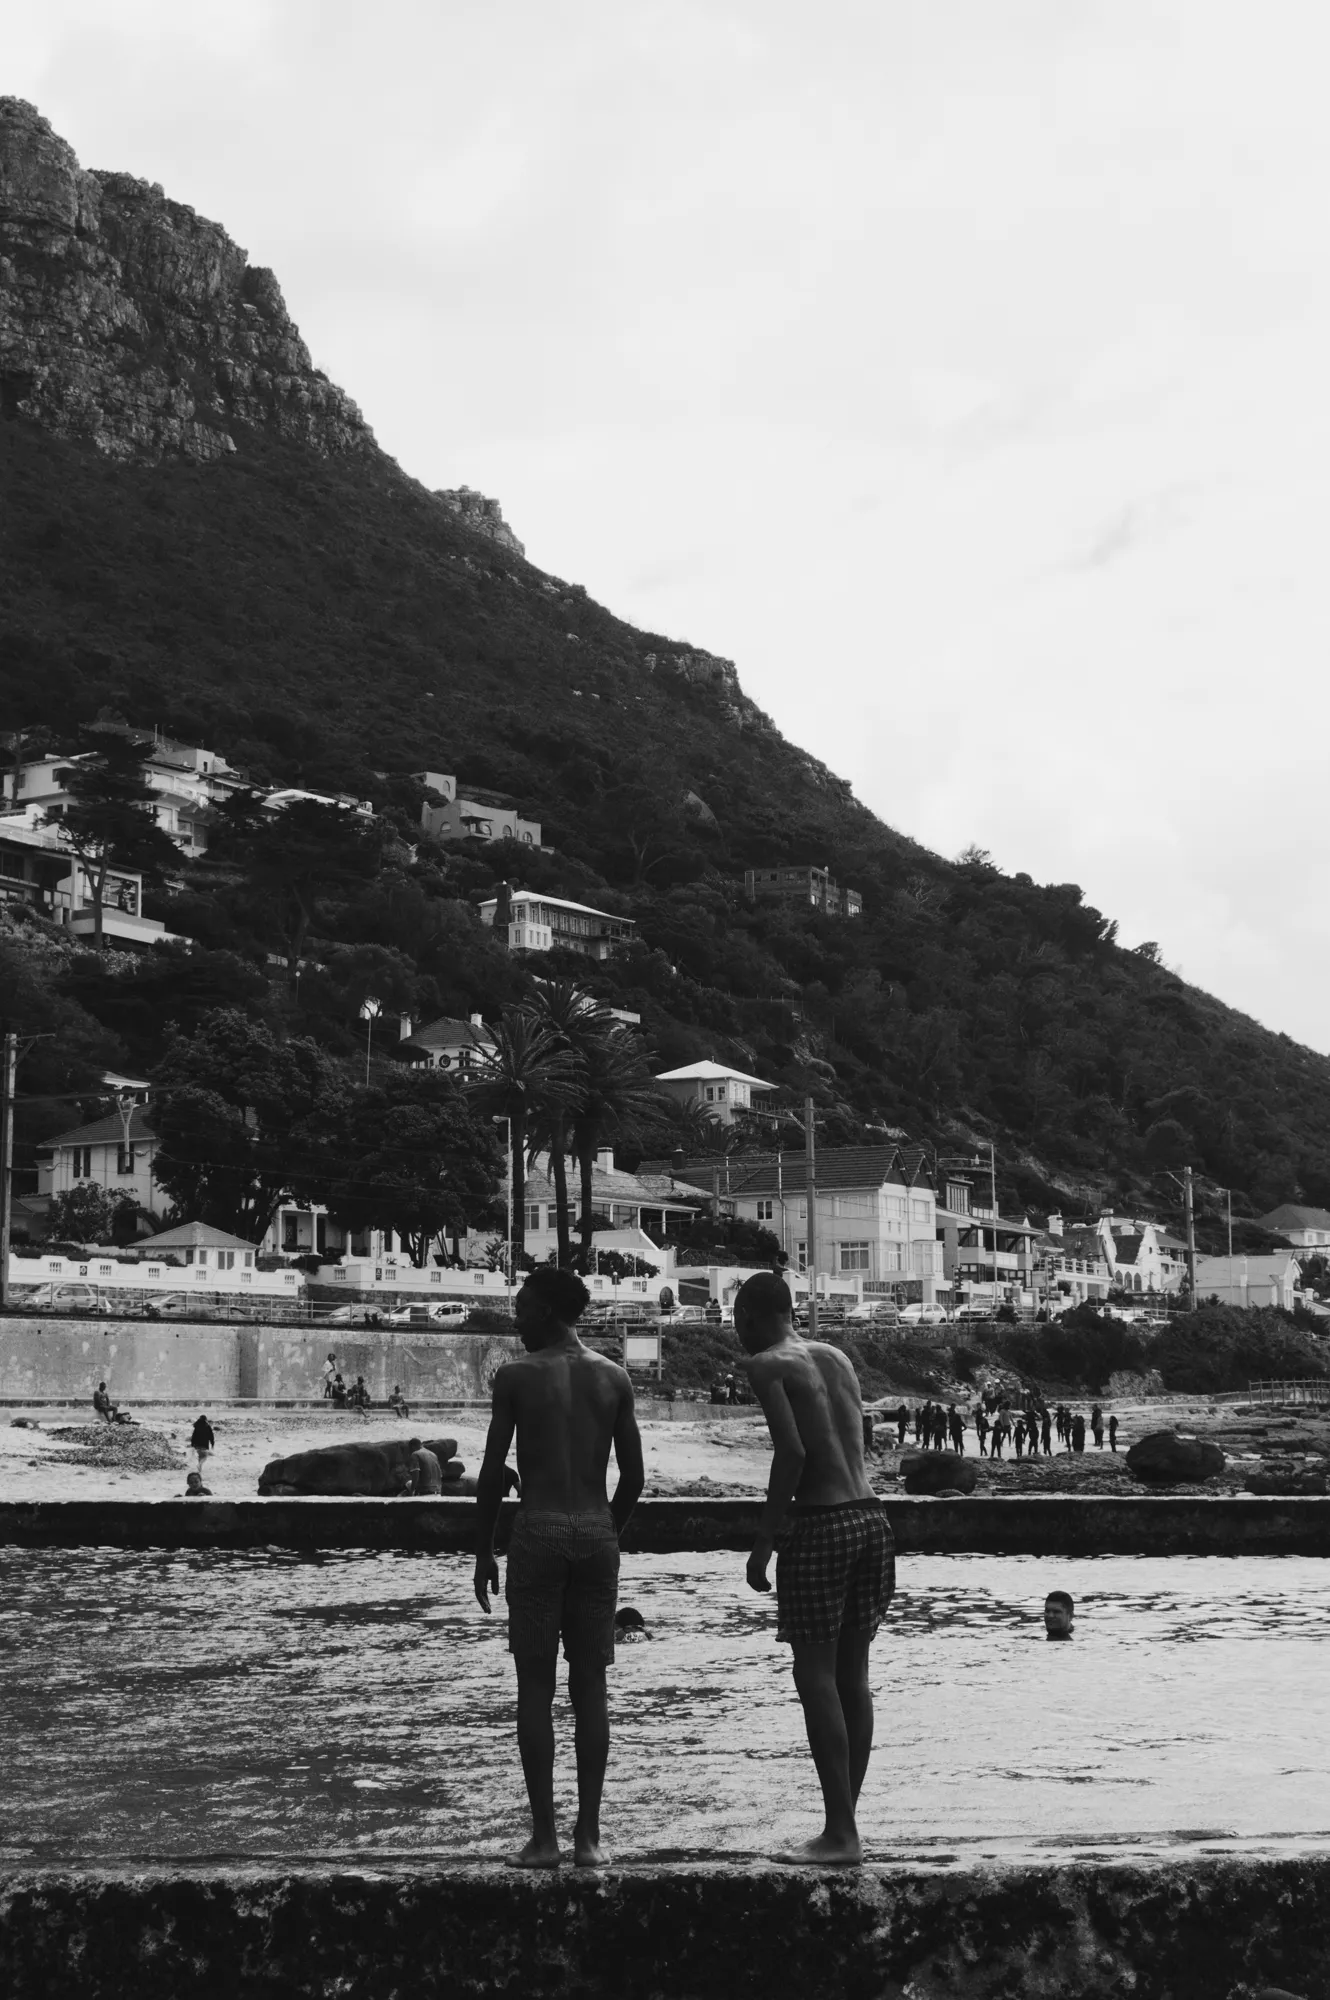 2018-12-27 - Simon's Town - Boys standing at the edge of the water